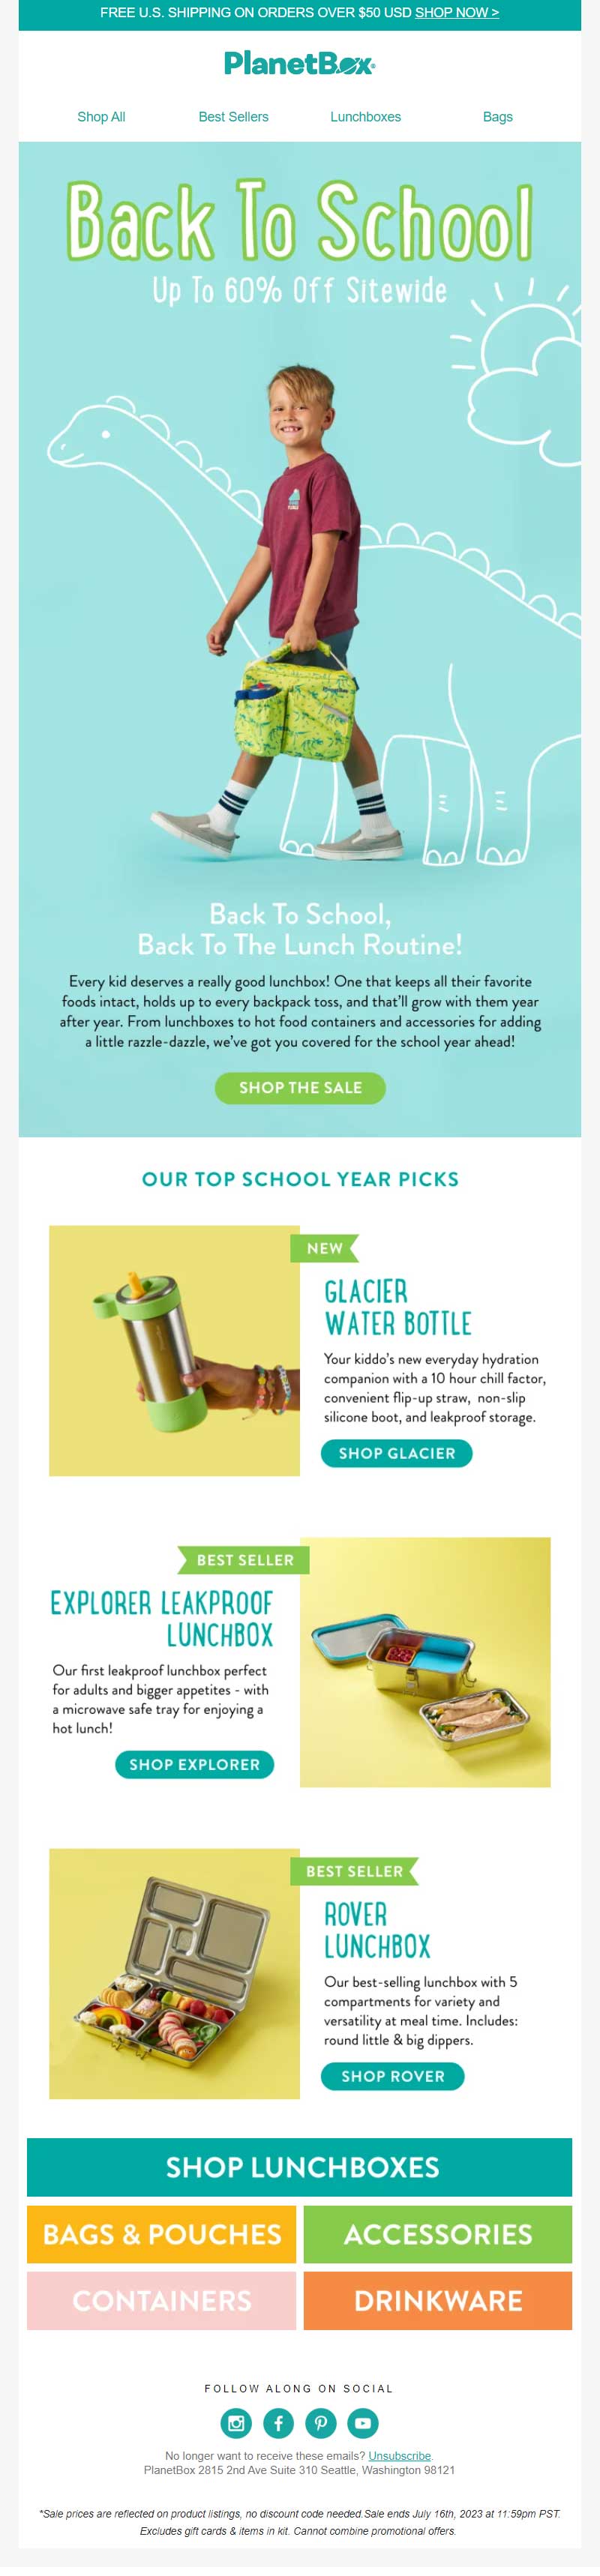 Planetbox- ack-To-School Email